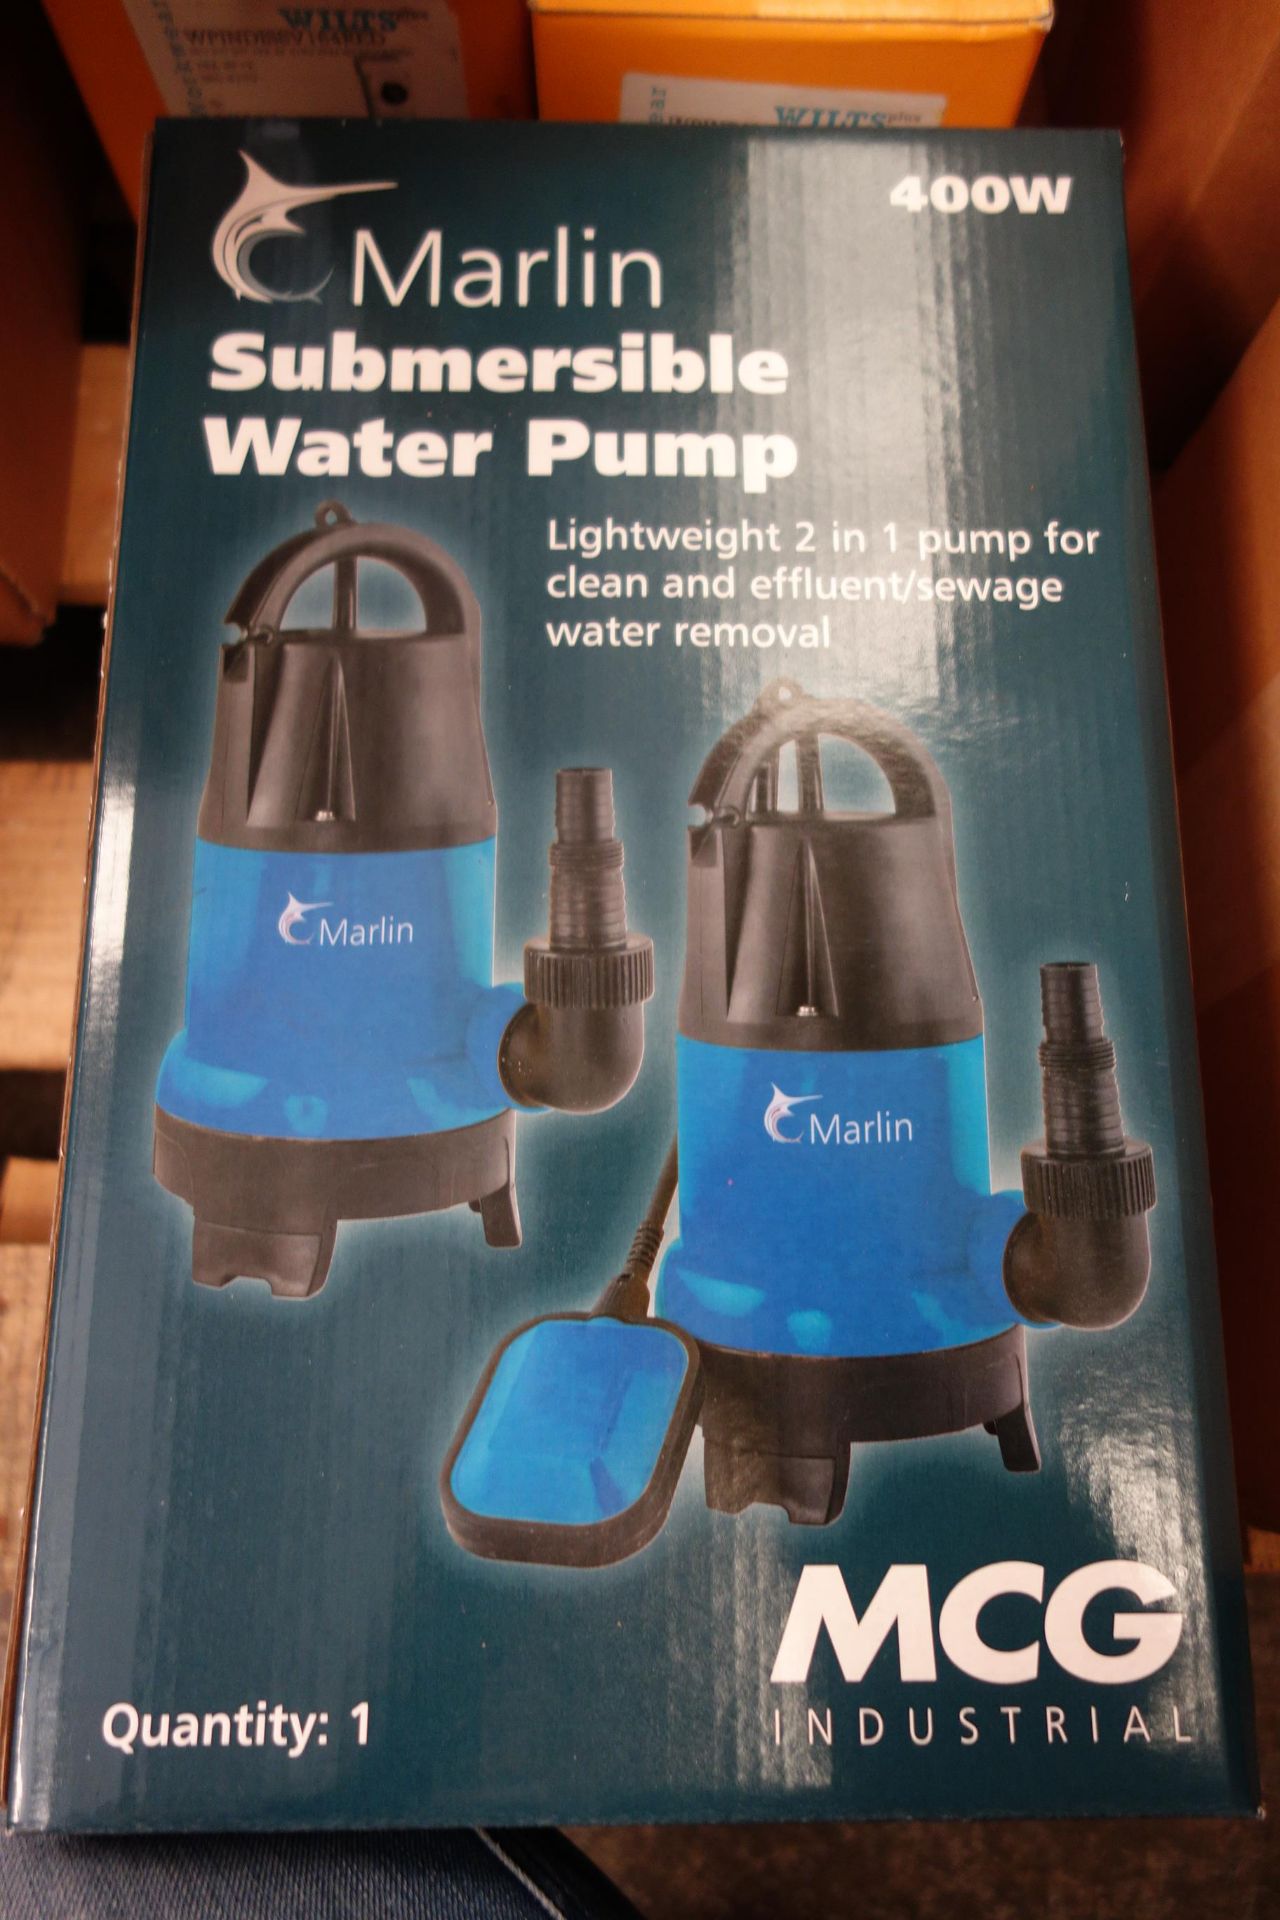 2 X Marlin Submflt Submersible Water Pump 400W With Float Switch